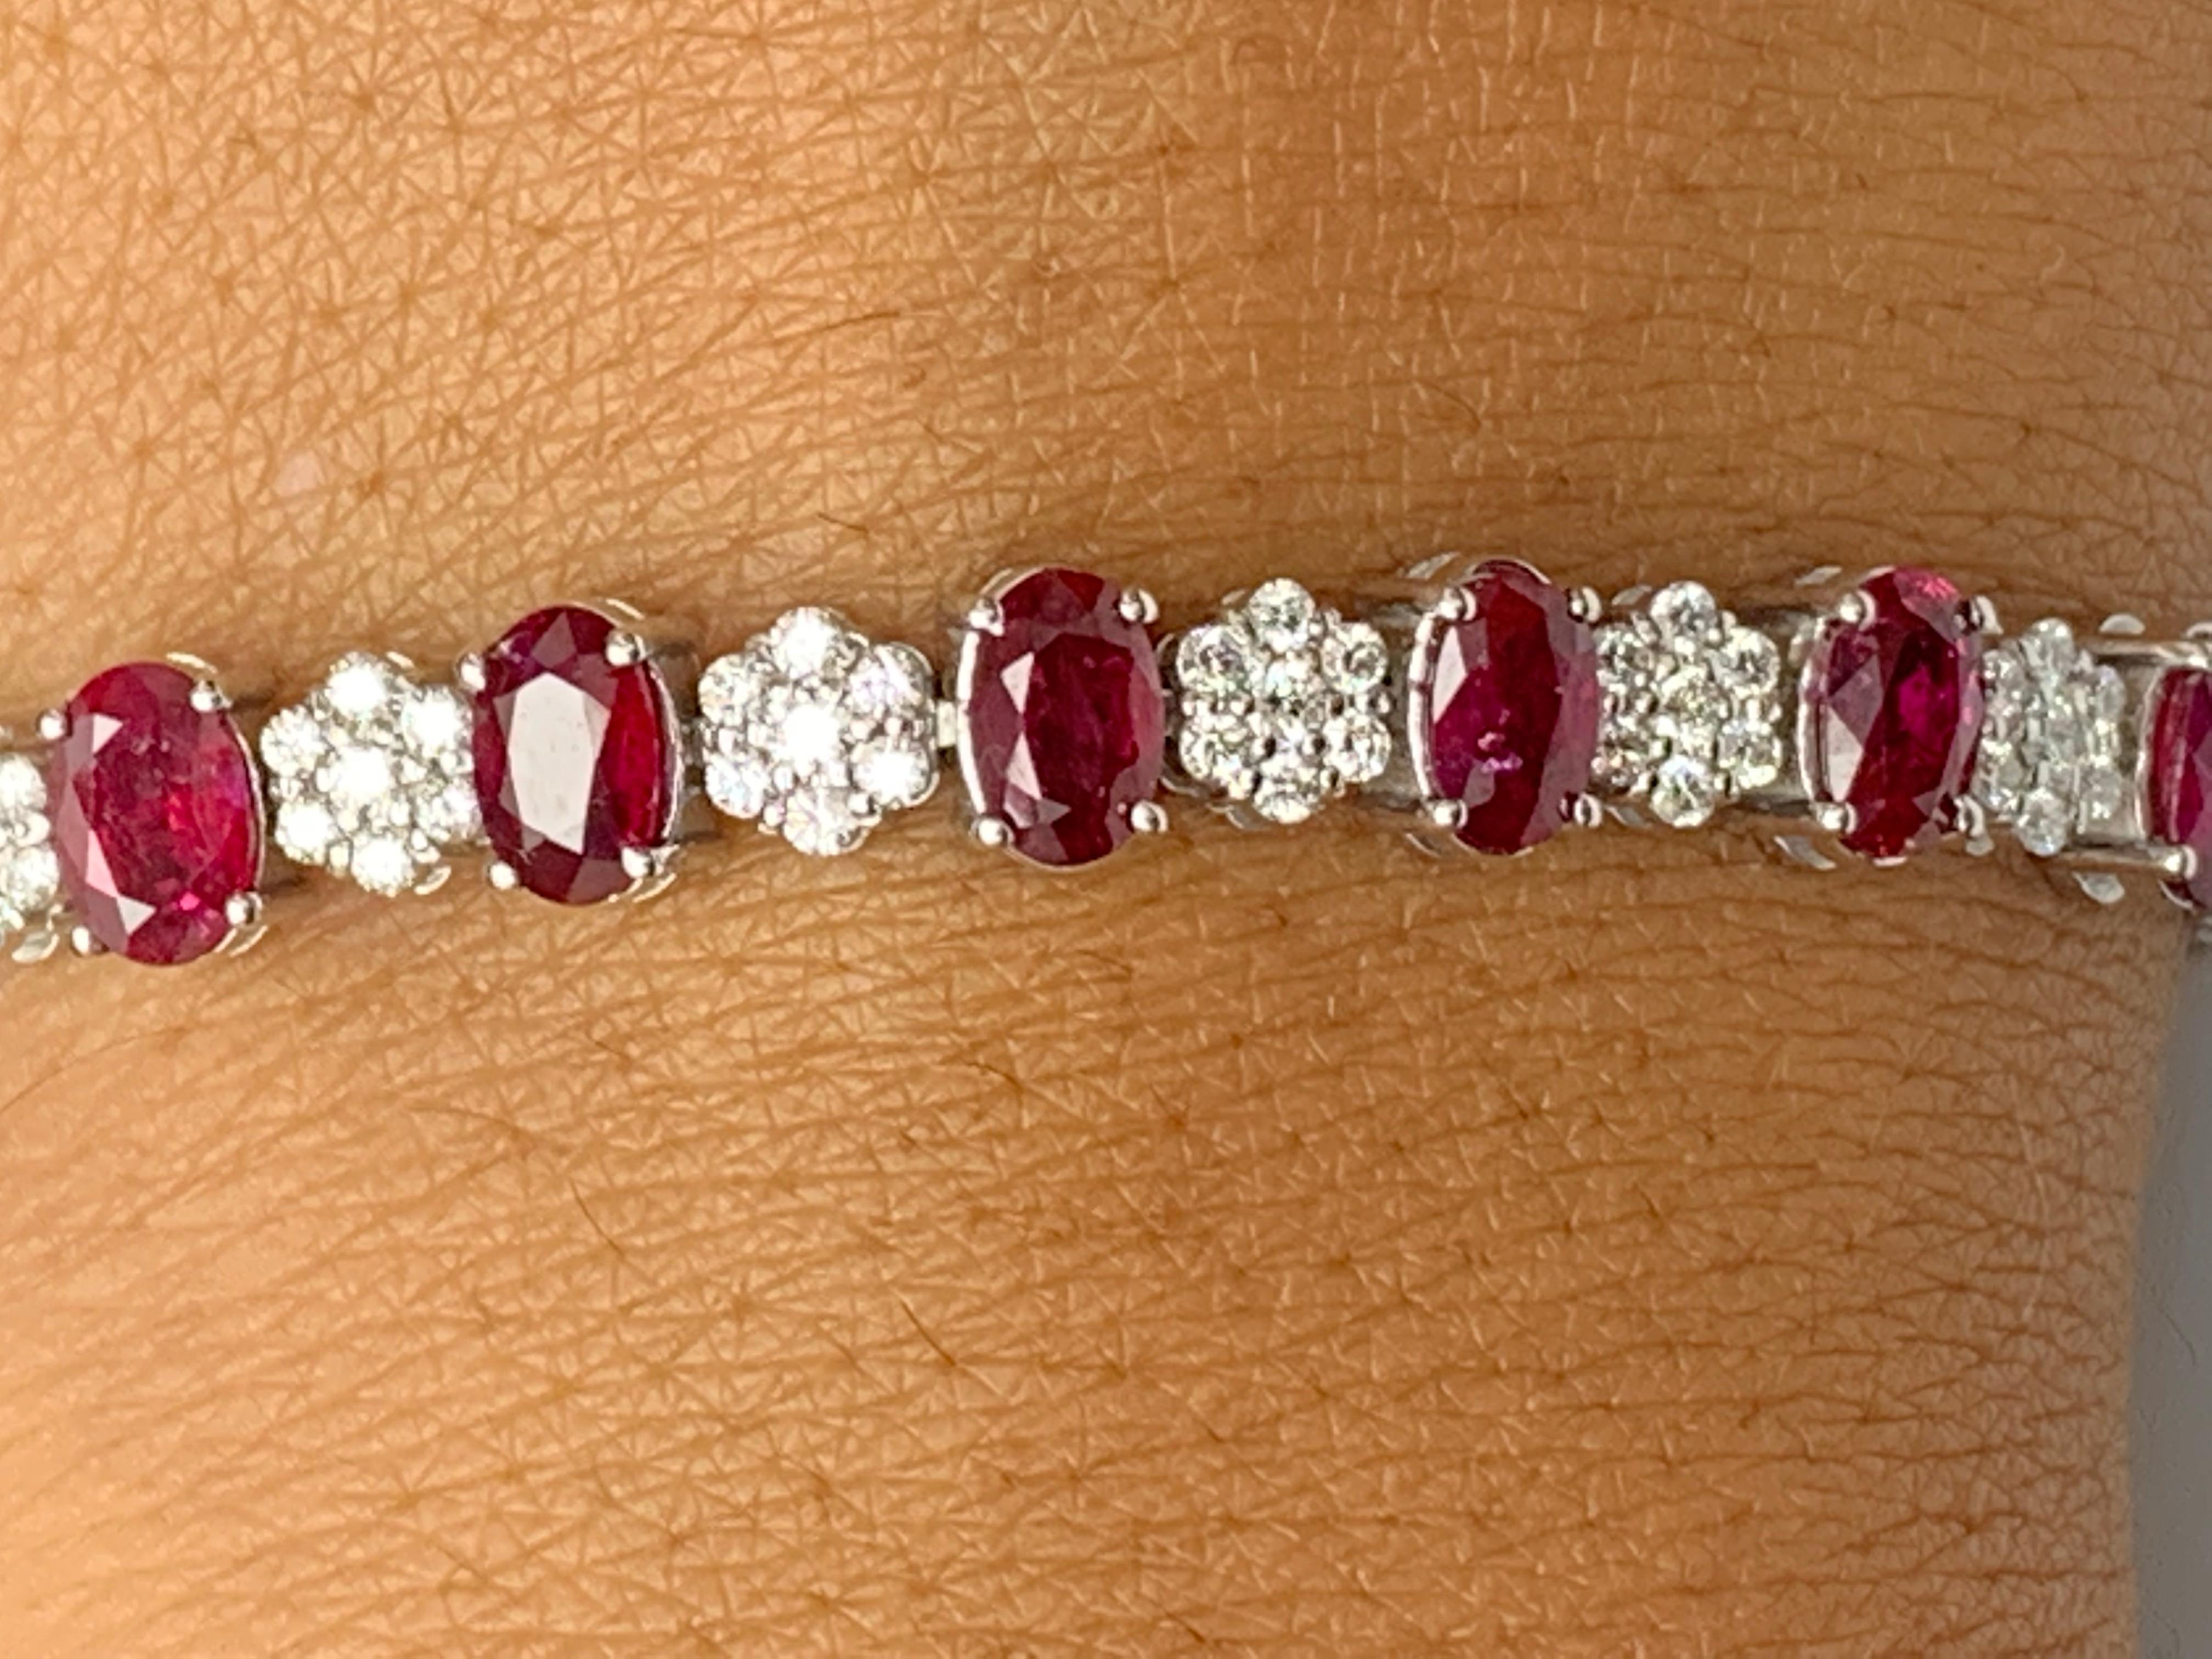 10.34 Carat Oval Cut Ruby and Diamond Tennis Bracelet in 14K White Gold For Sale 6